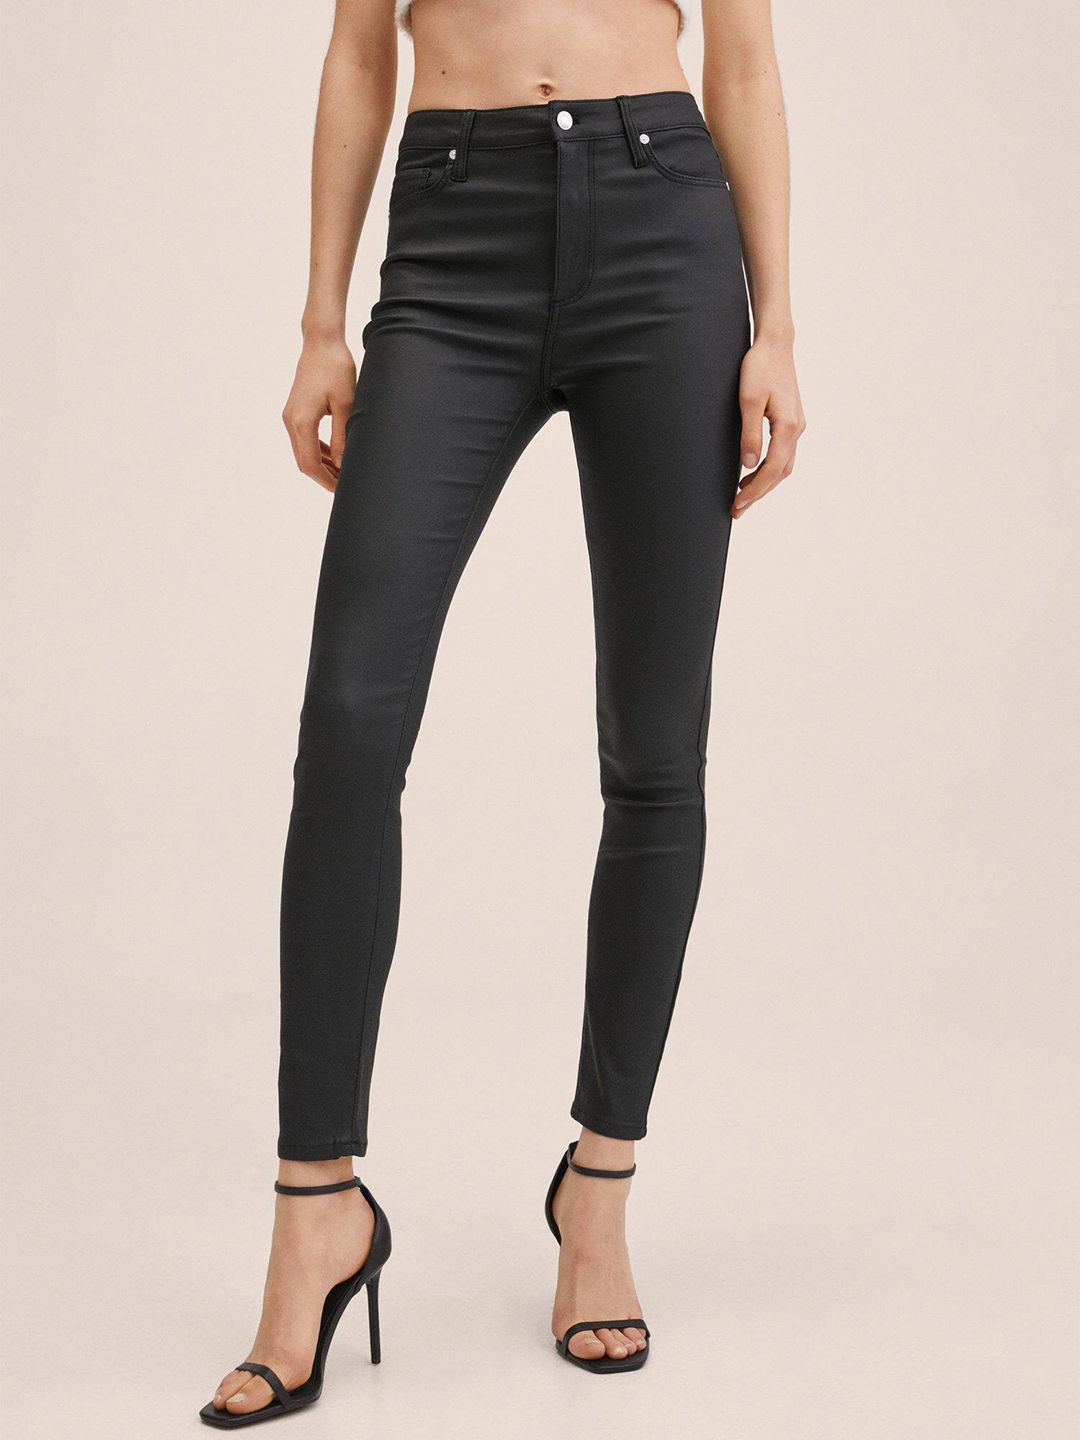 MANGO Women Black Skinny Fit High-Rise Stretchable Jeans Price in India